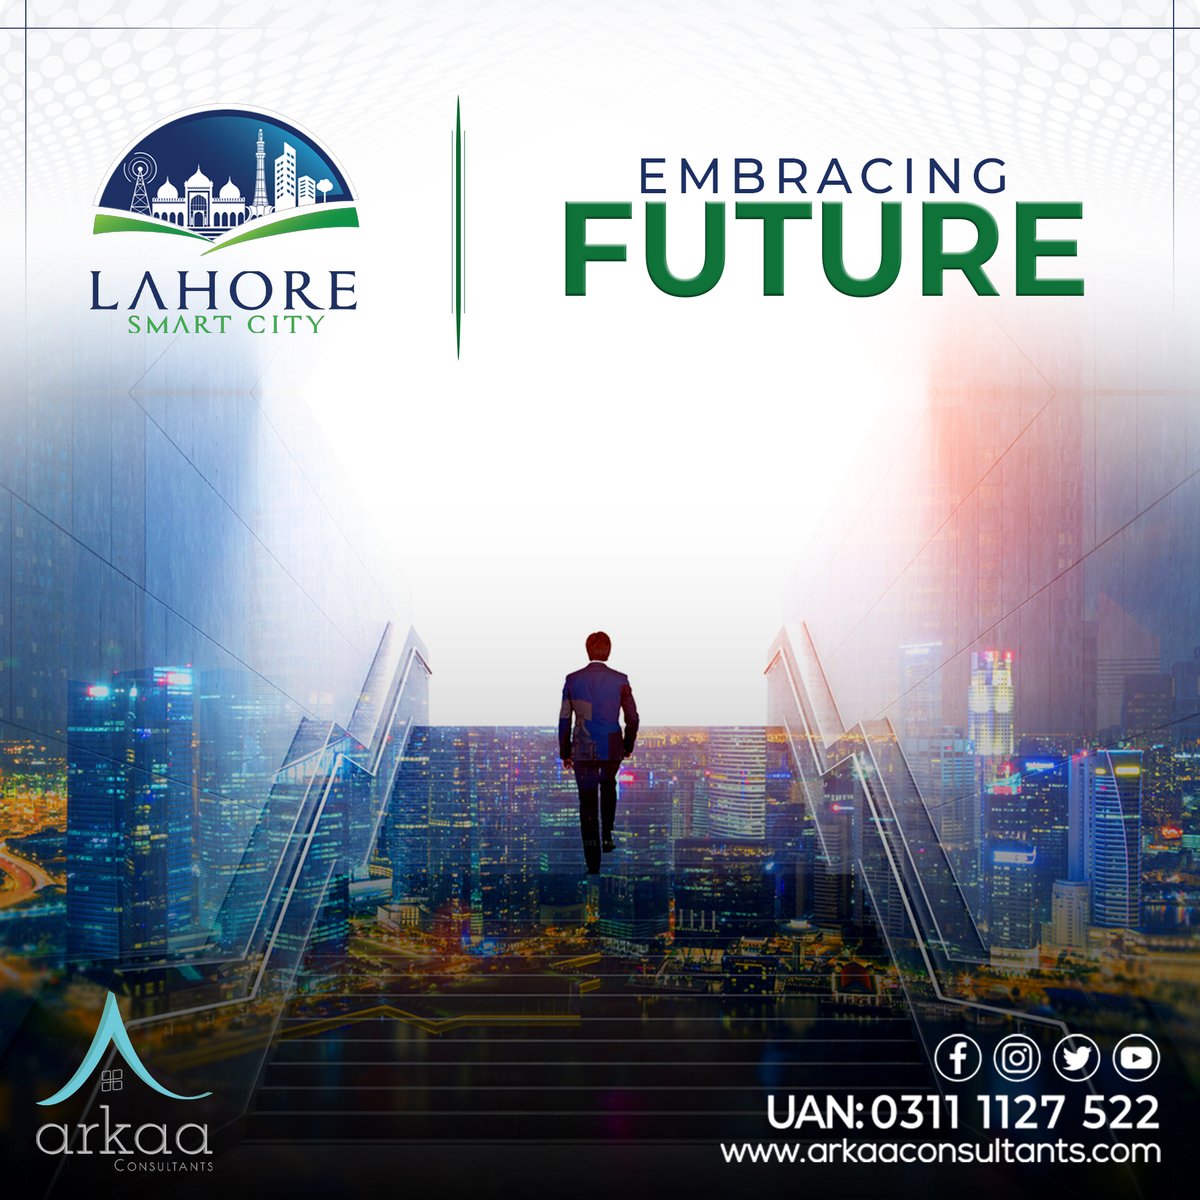 Lahore Smart City can provide you with everything you need.

#Arkaa #lahoresmartcity #arkaaconsultants #smartinterchange #SmartCities #lscresidential #StayTuned #nextbigthing #lsc #lahore #flatteringviews #amazingprices #EmbraceTheFuture #smartamenities #futurehomesite